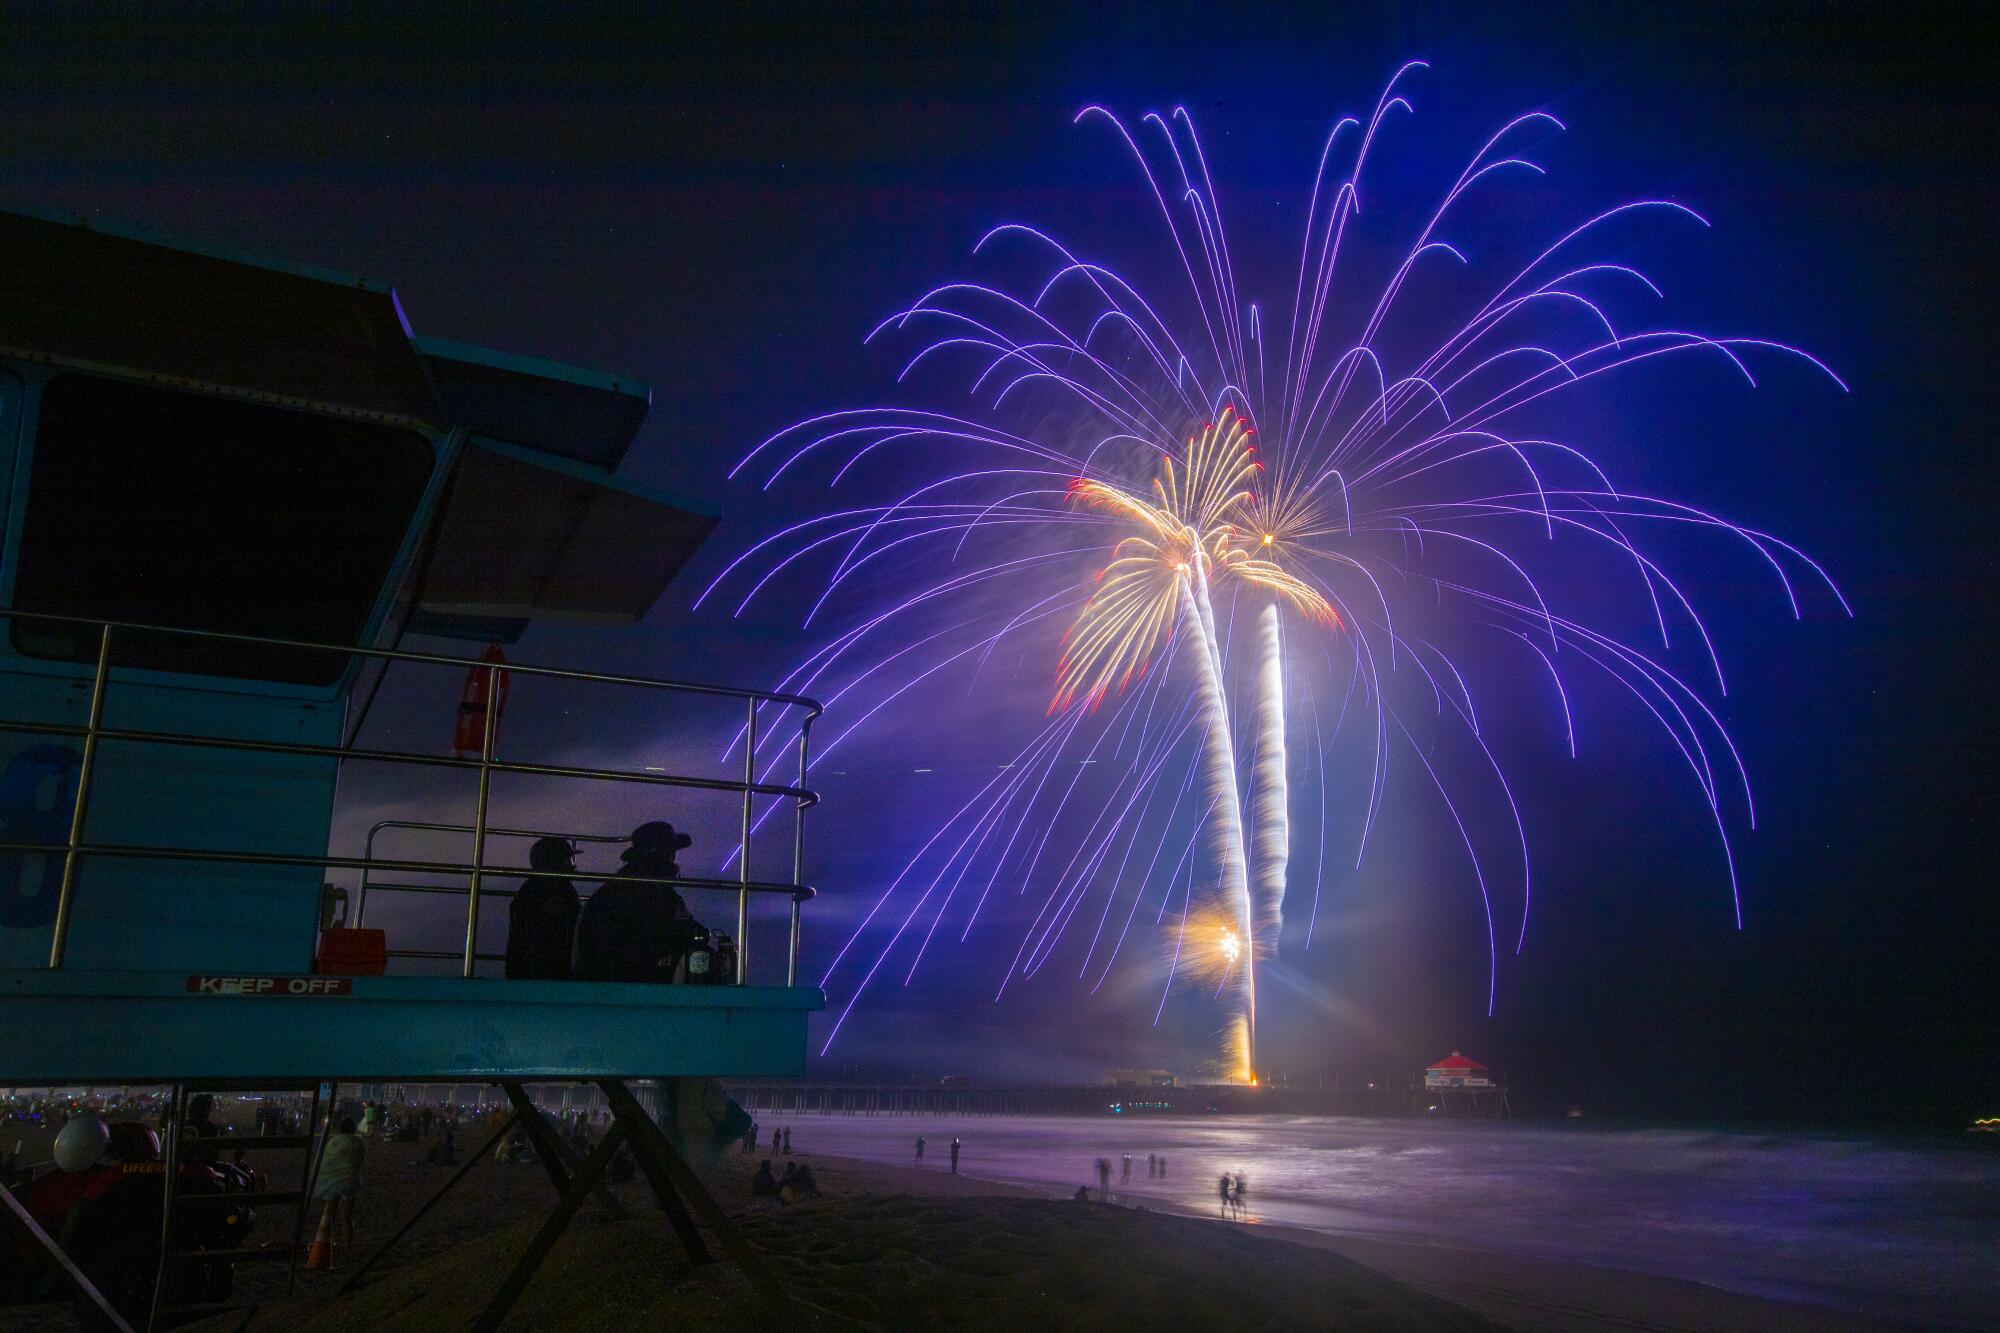 Huntington Beach lifeguards watch the fireworks display on the Fourth of July.